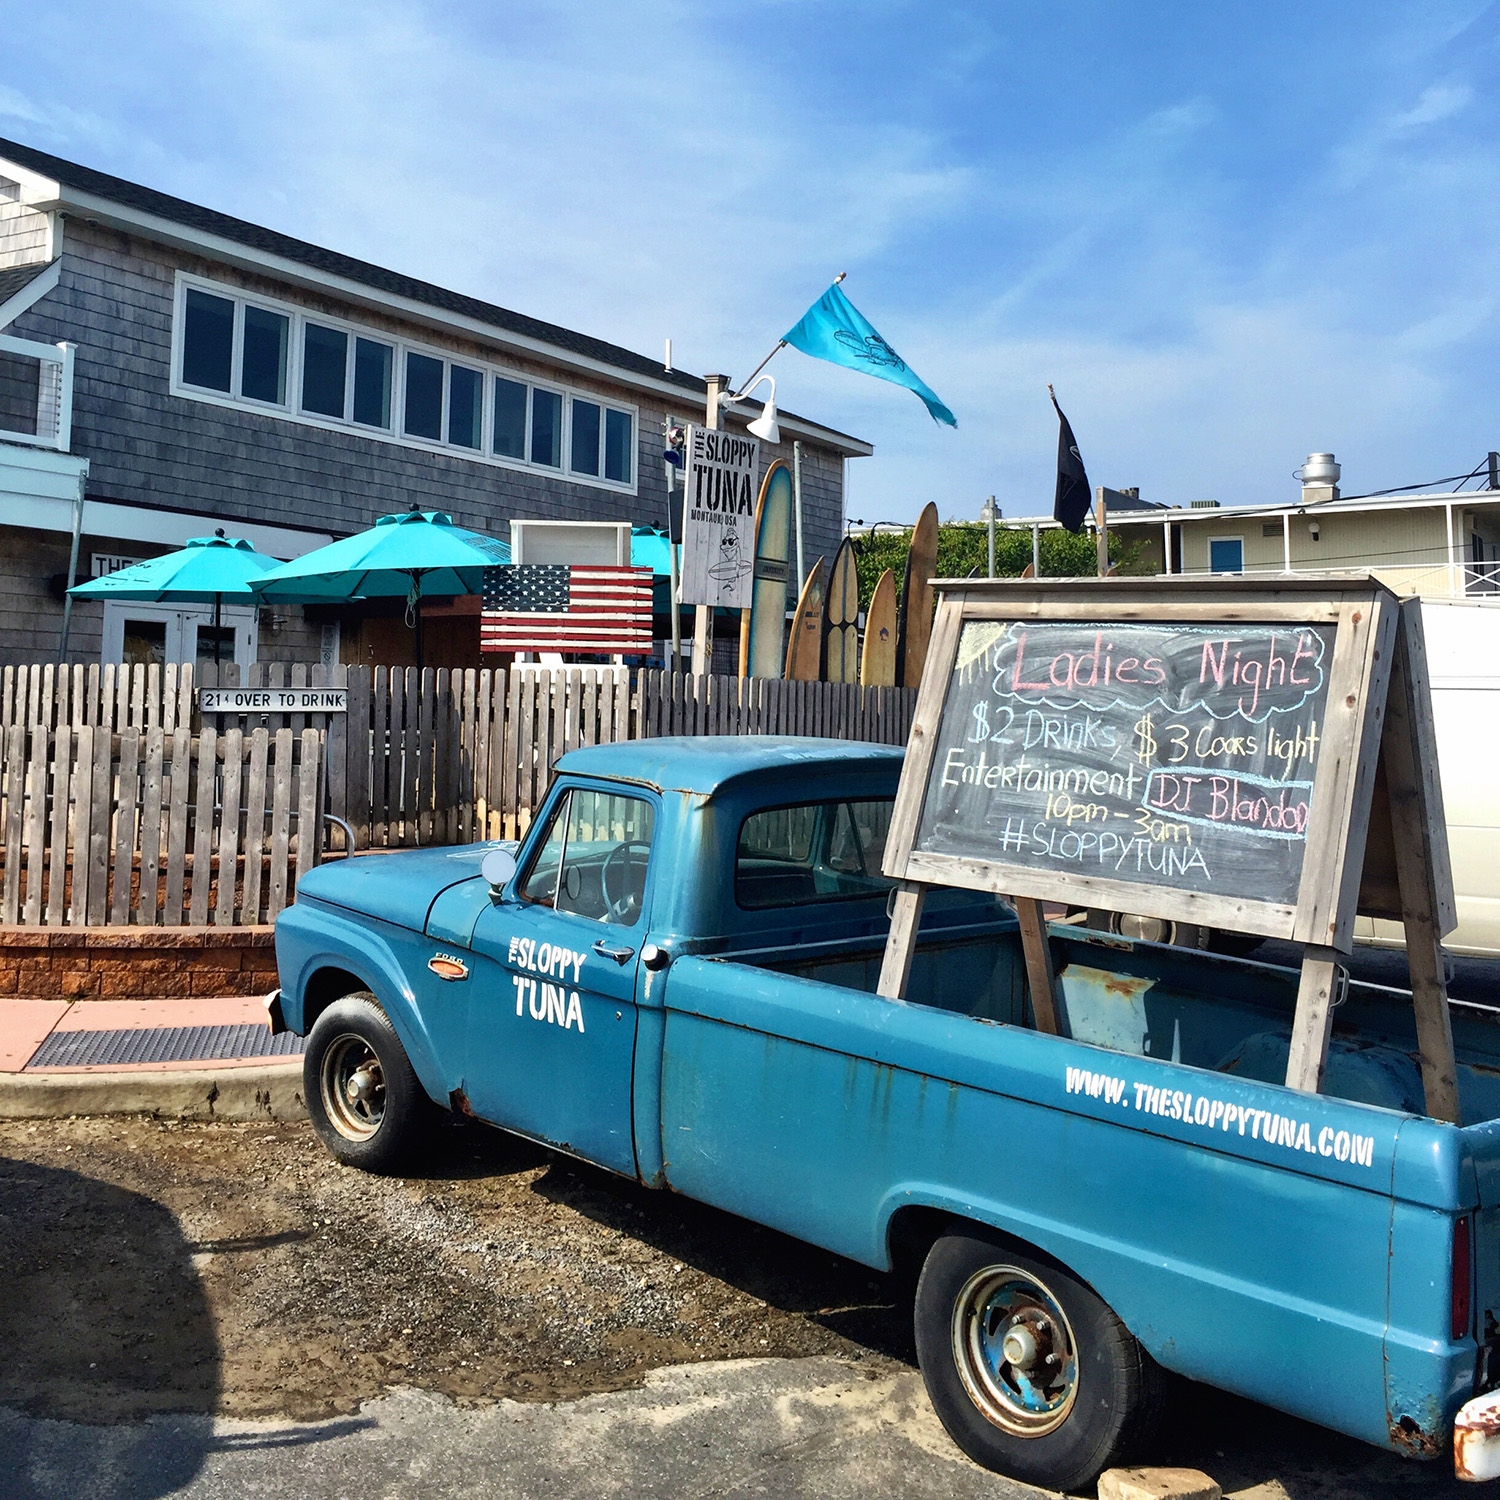 A blue pickup truck parked on the sidewalk in front of a shingle house has a large blackboard sign in the tray advertising a Ladies Night 